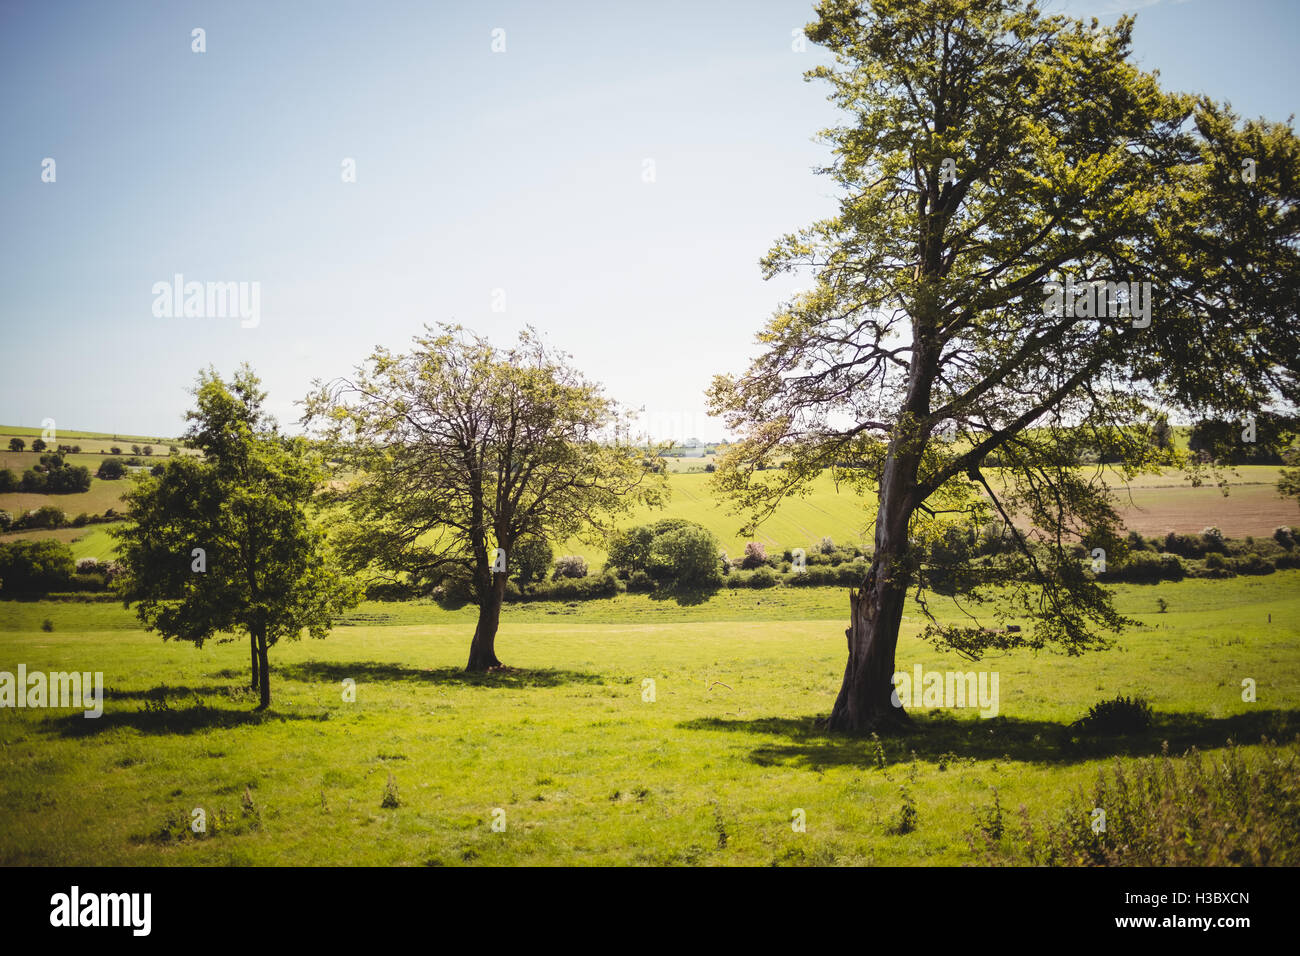 View of green trees in landscape Stock Photo